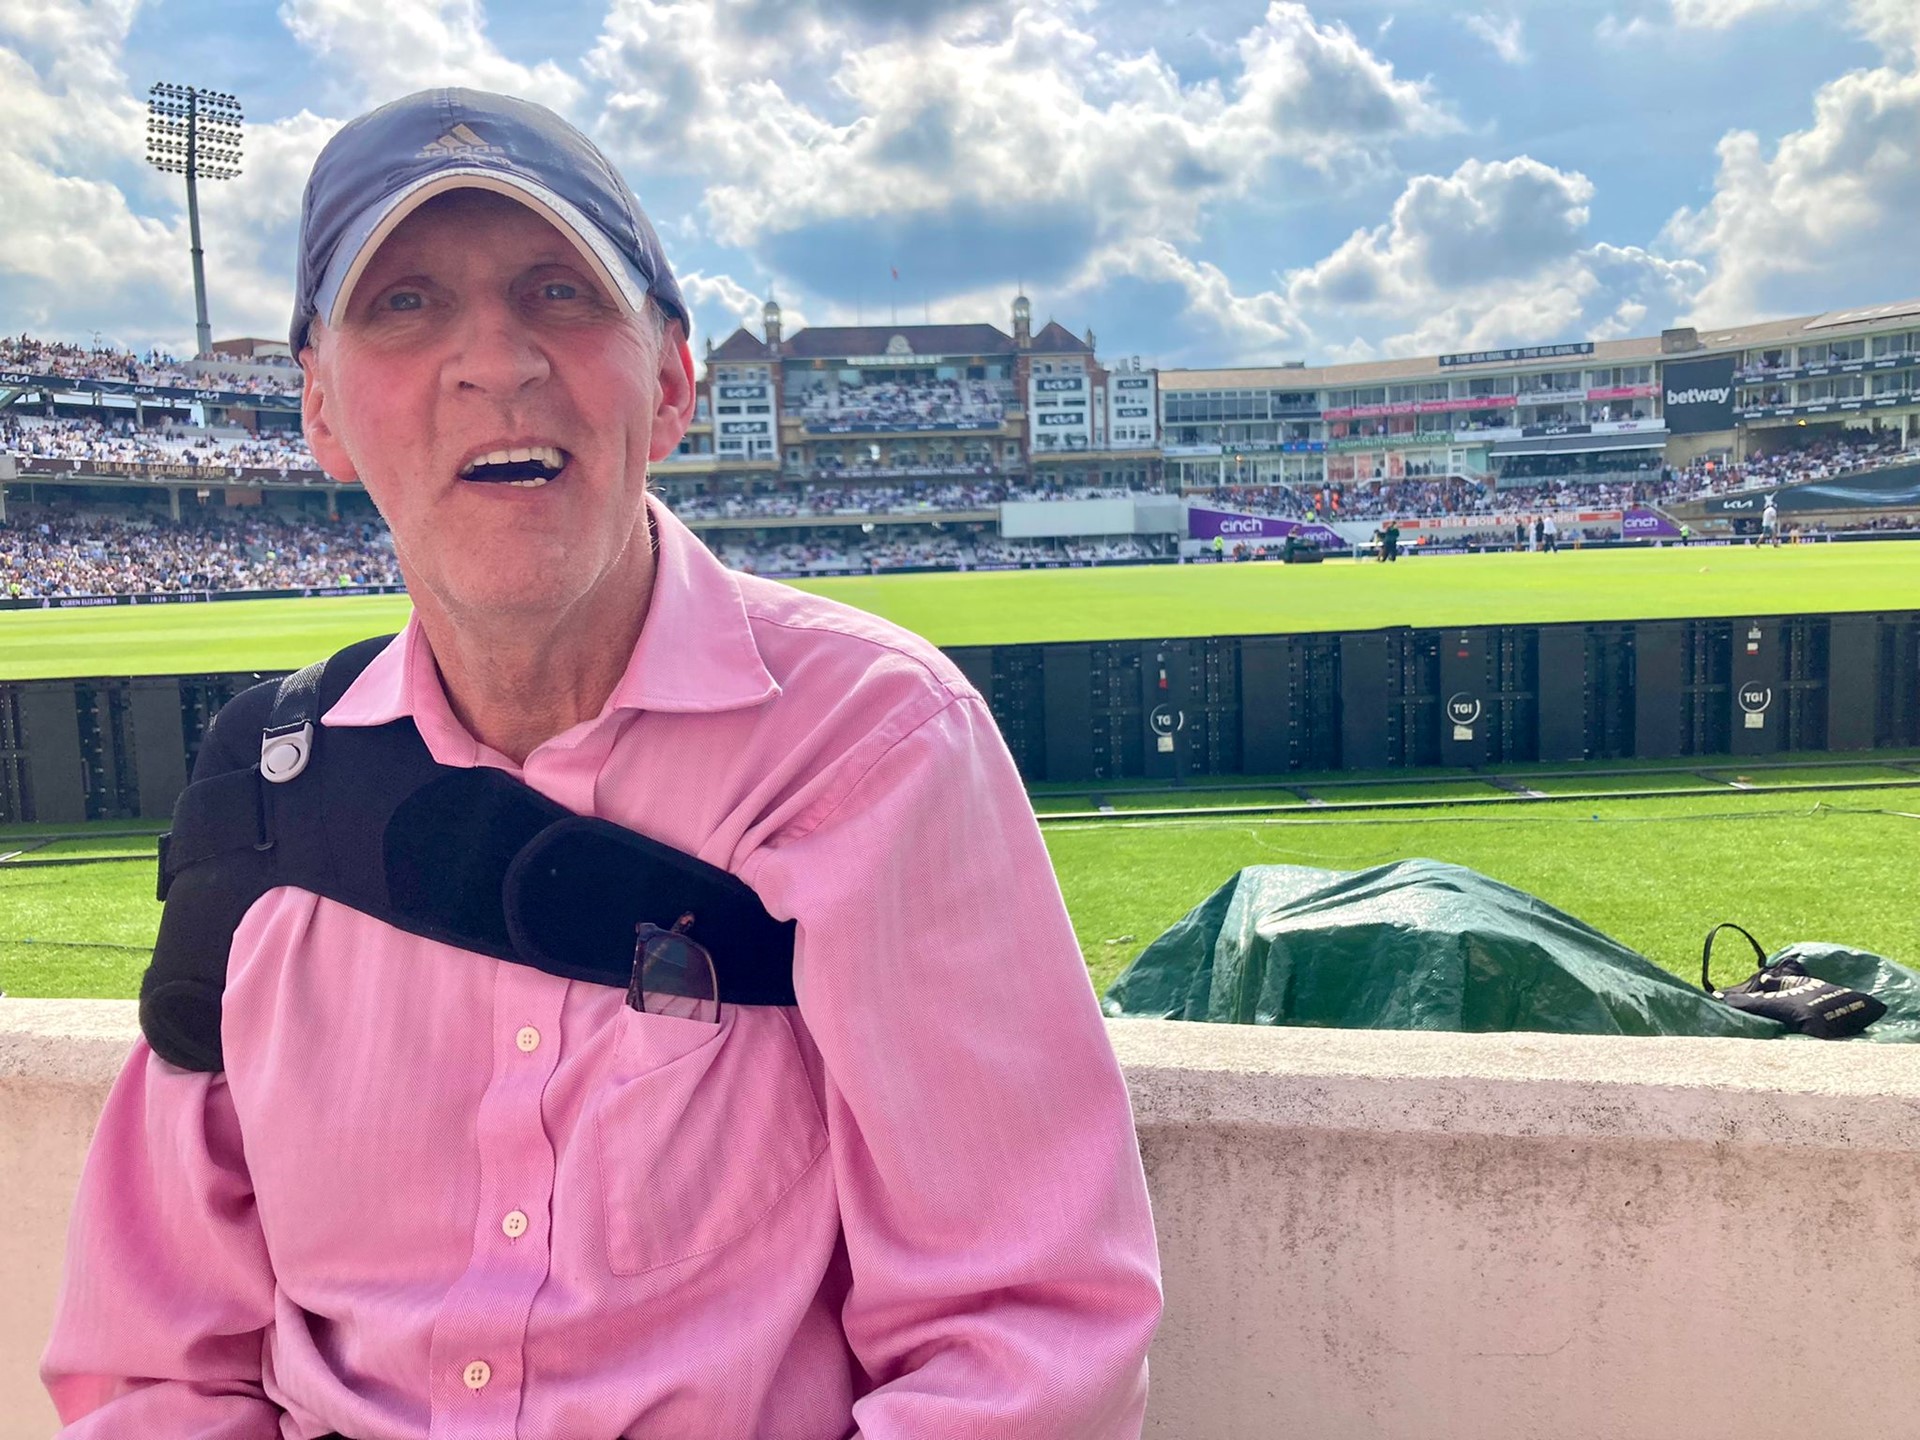 Steve Cobbs at London's Oval fulfilling his wish of attending a cricket game